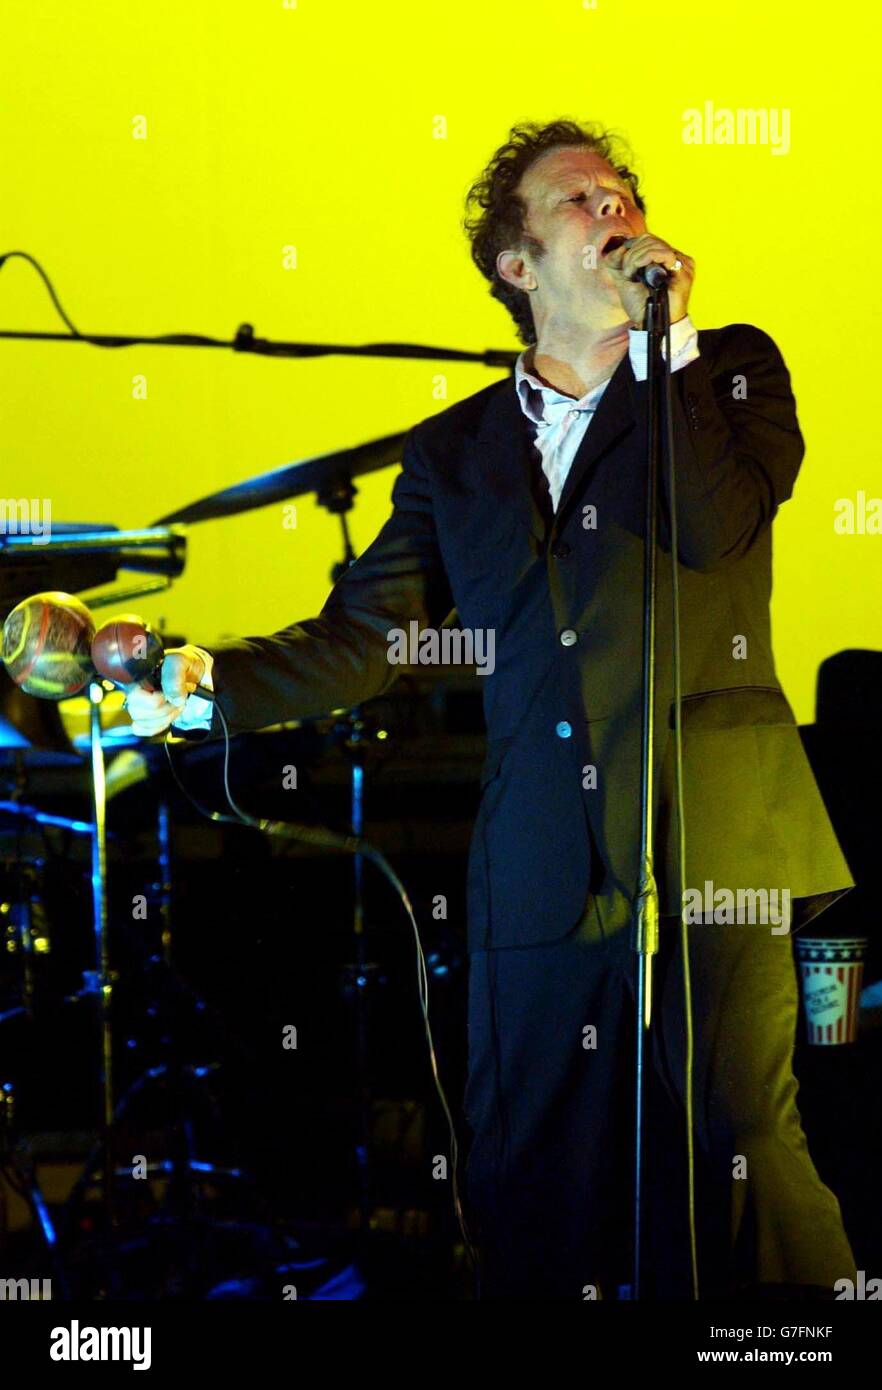 Tom Waits Concert High Resolution Stock Photography and Images - Alamy